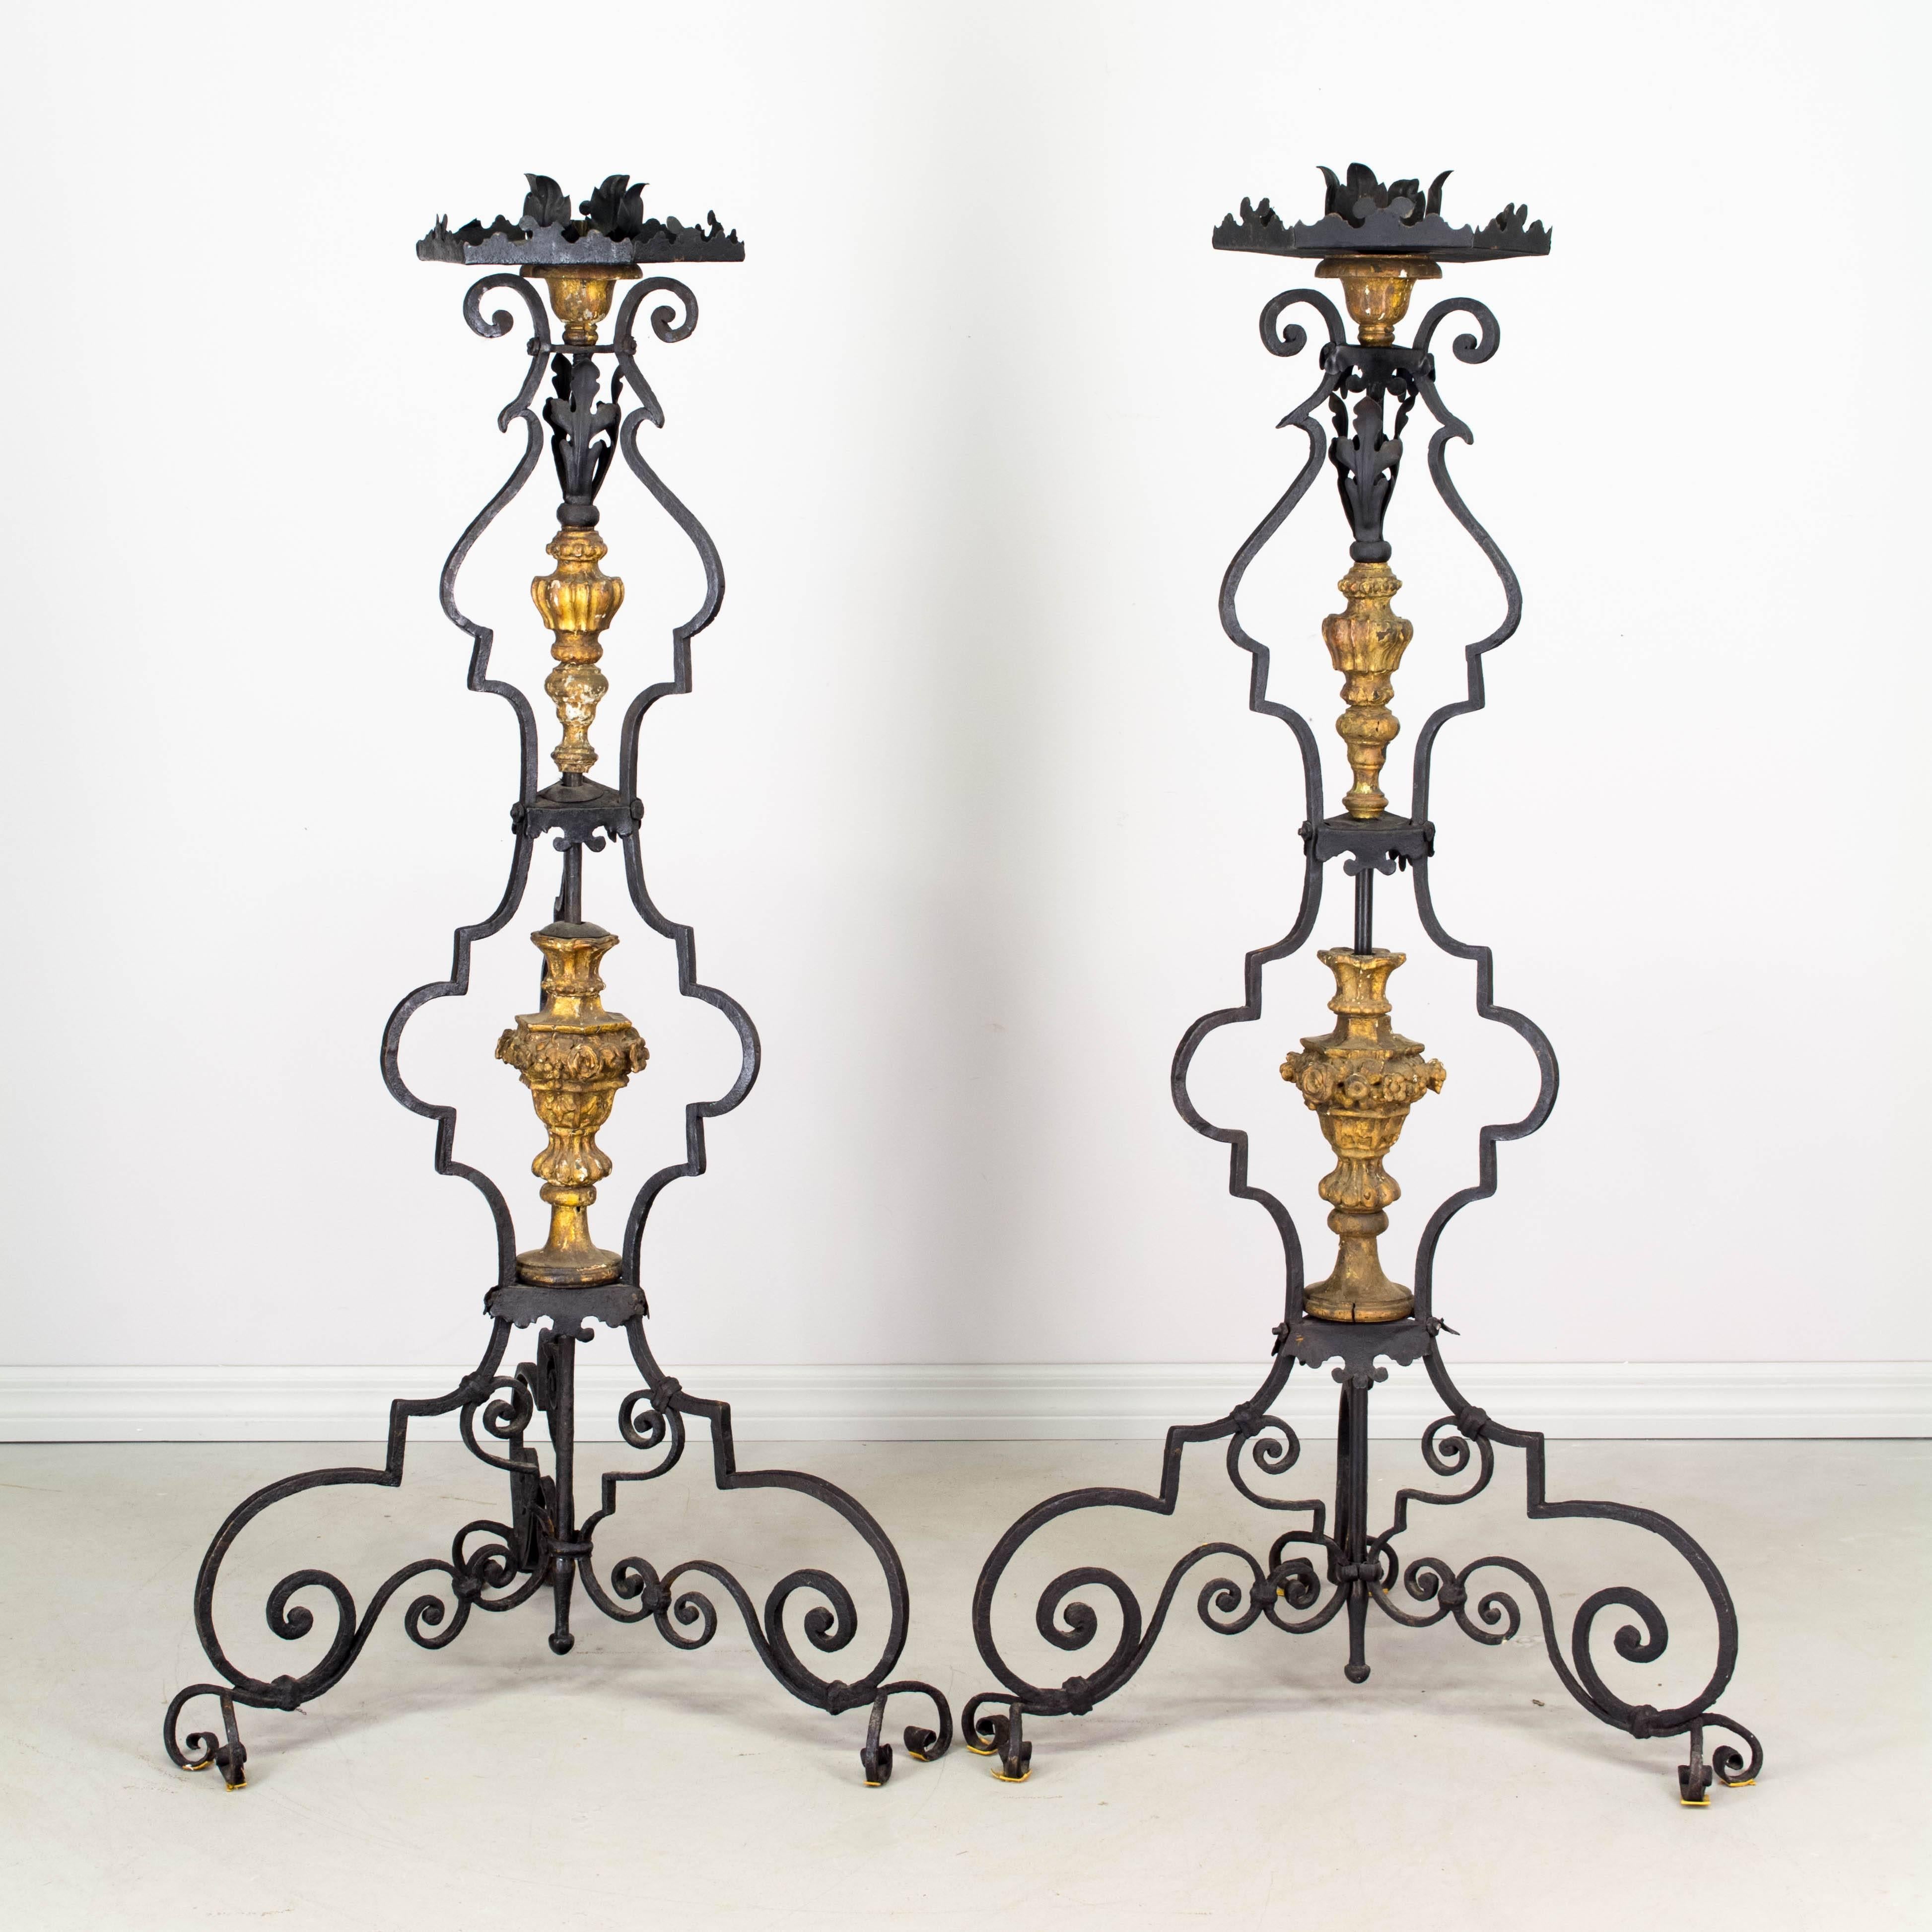 Baroque Pair of 19th Century Italian Wrought Iron Torchieres